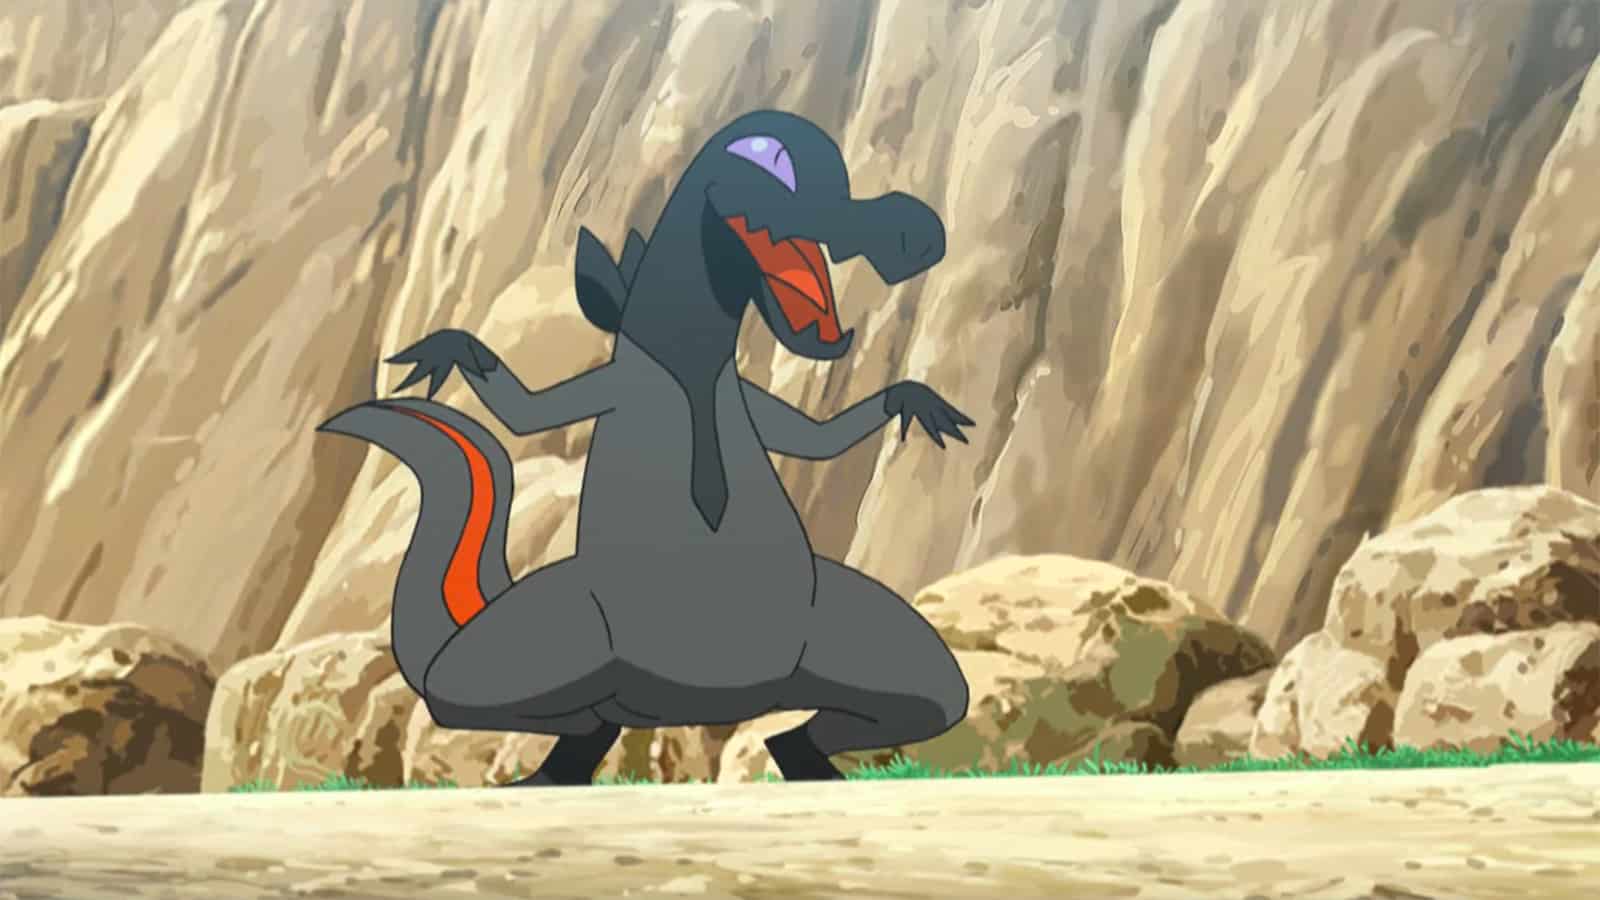 Salandit appearing in the Pokemon anime